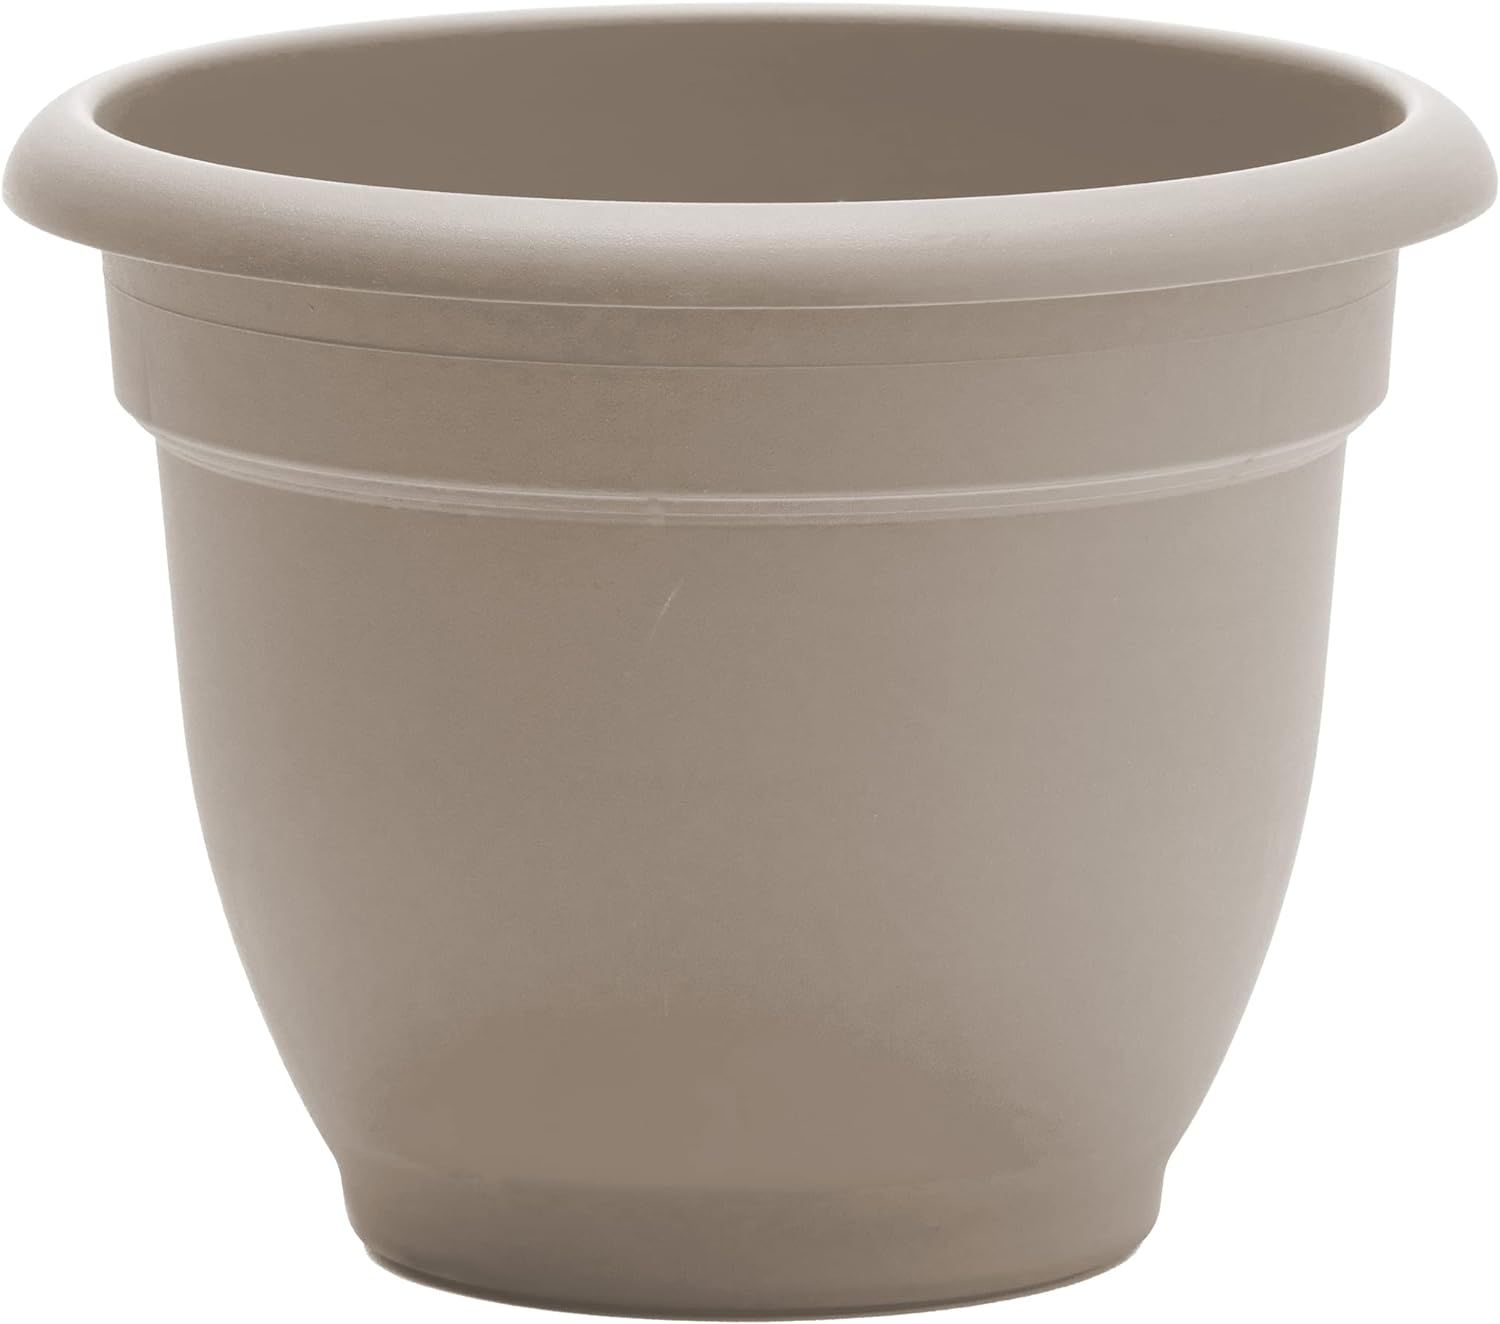 Bloem Ariana Self Watering Planter: 12" - Pebble Stone - Durable Resin Pot, for Indoor and Outdoo... | Amazon (US)